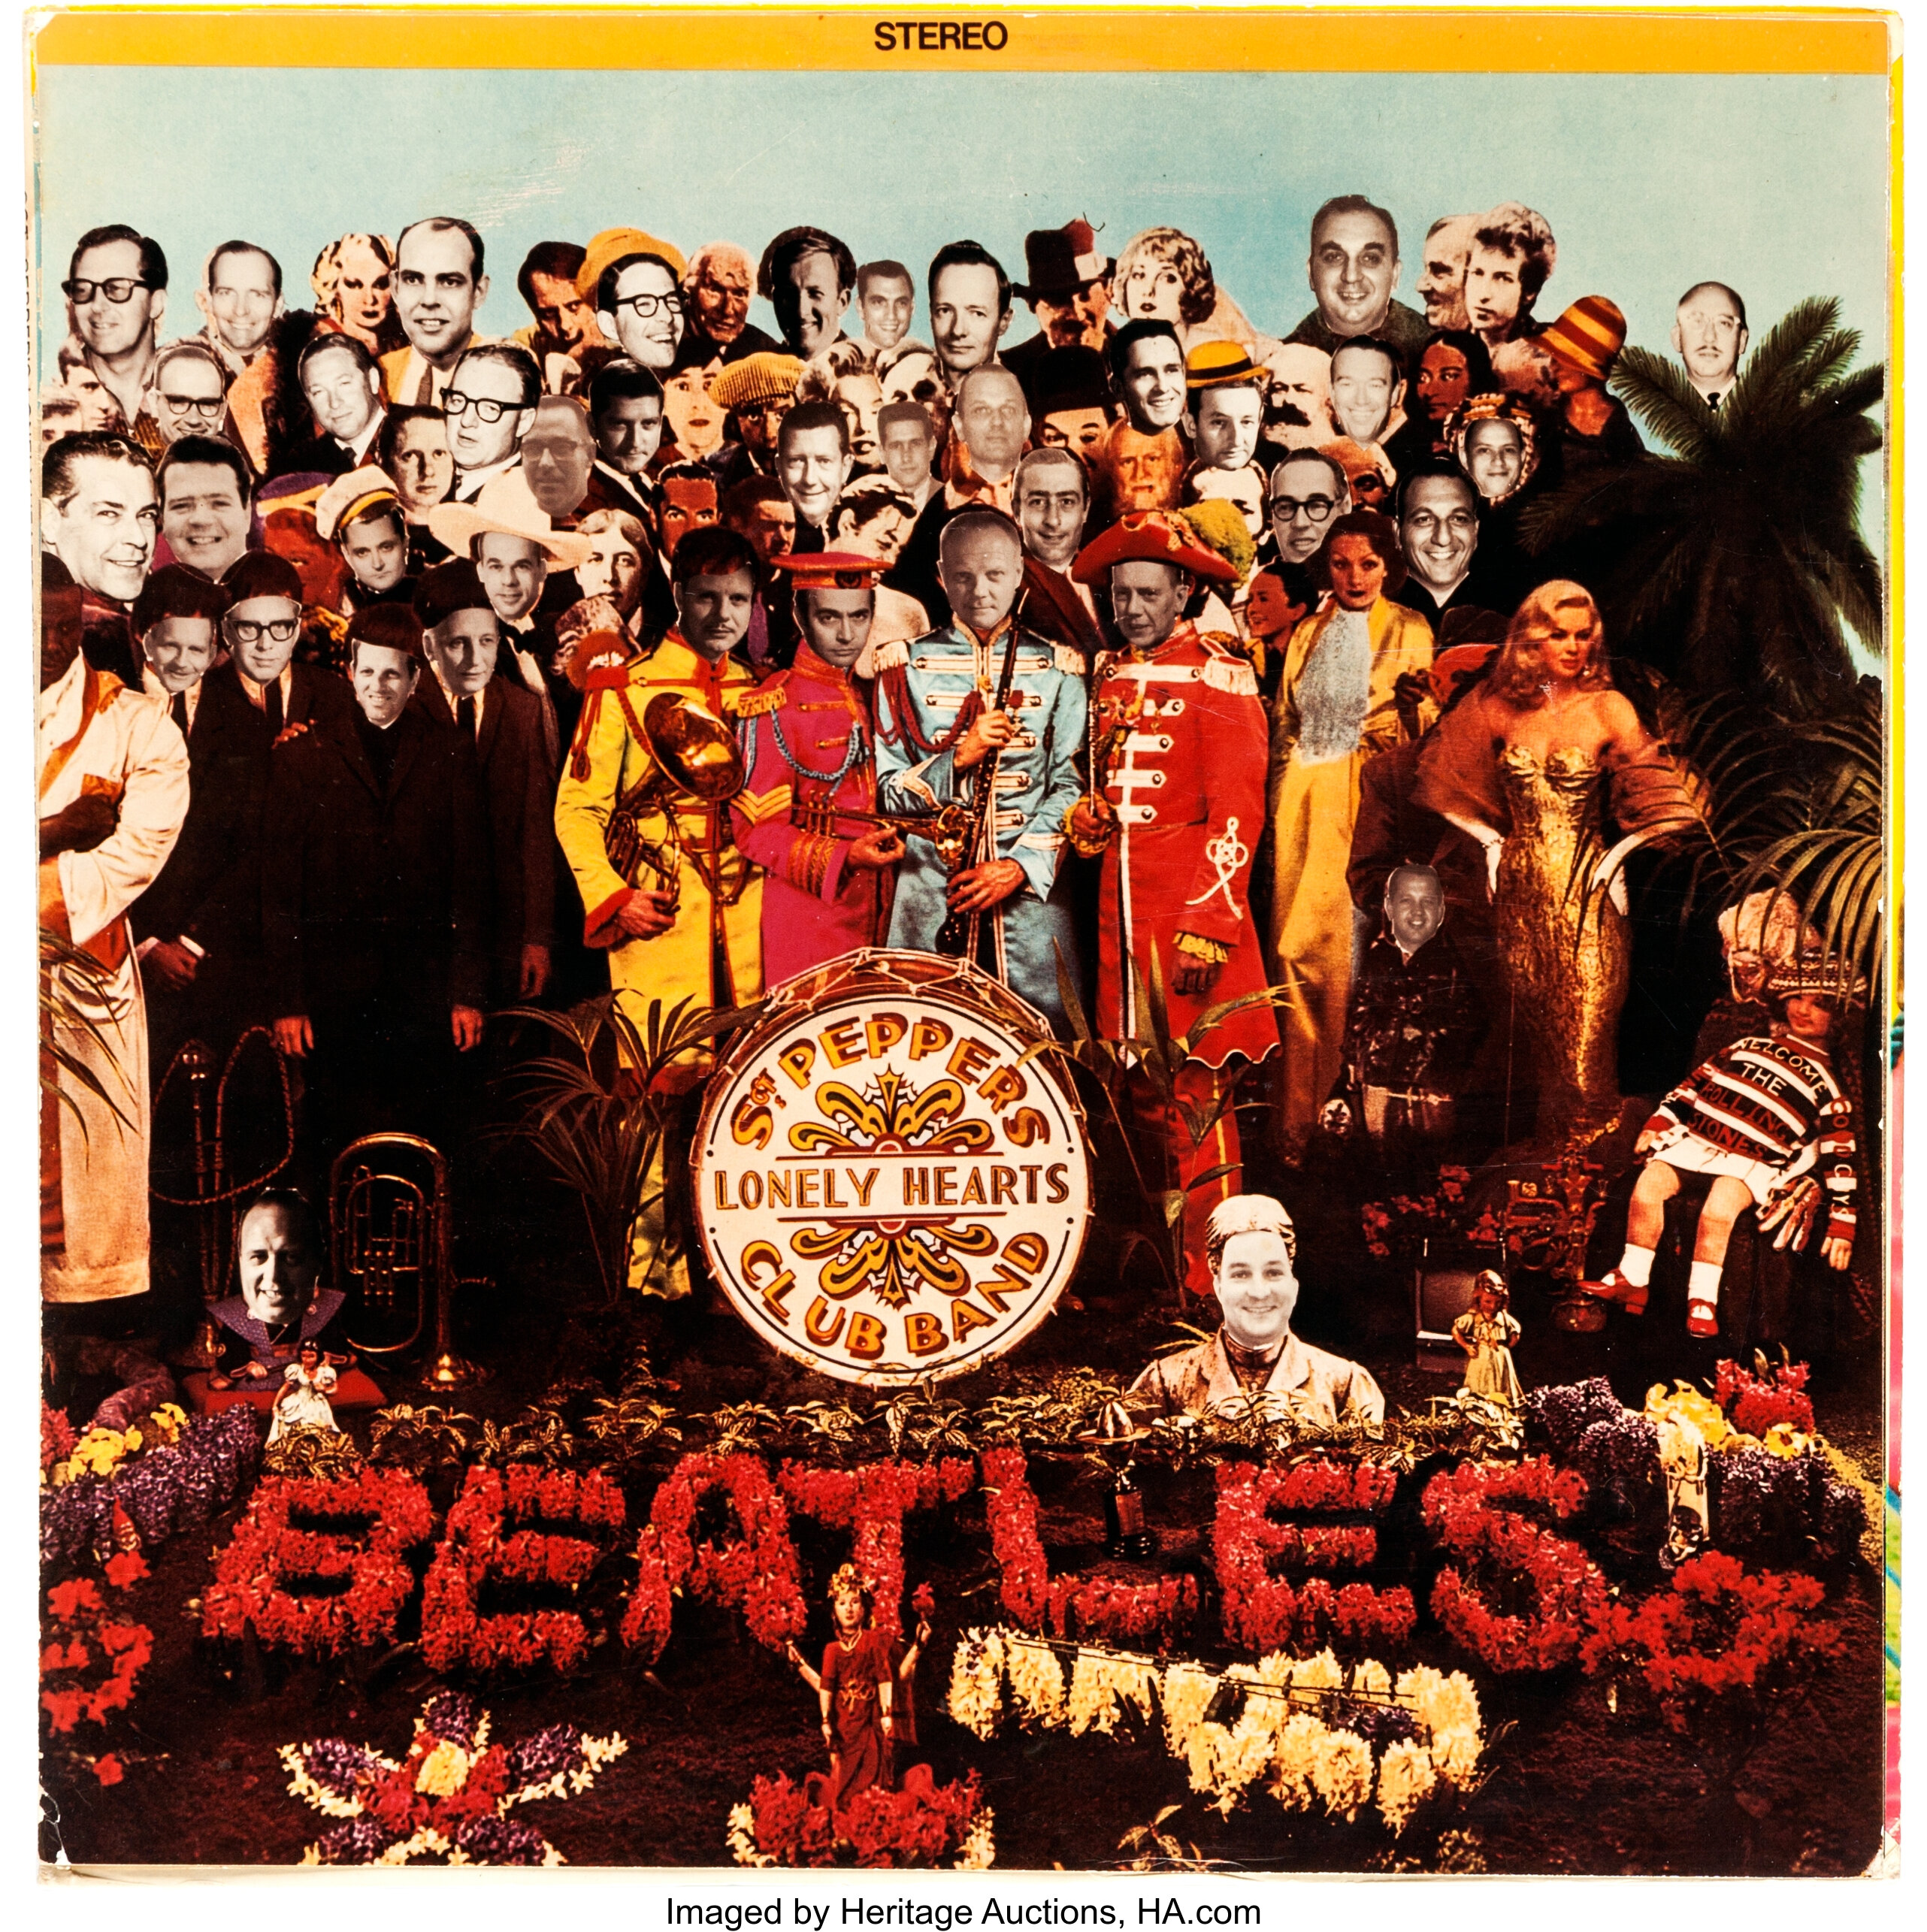 Beatles Ultra Rare Album Cover Sgt. Pepper's Lonely Hearts Club